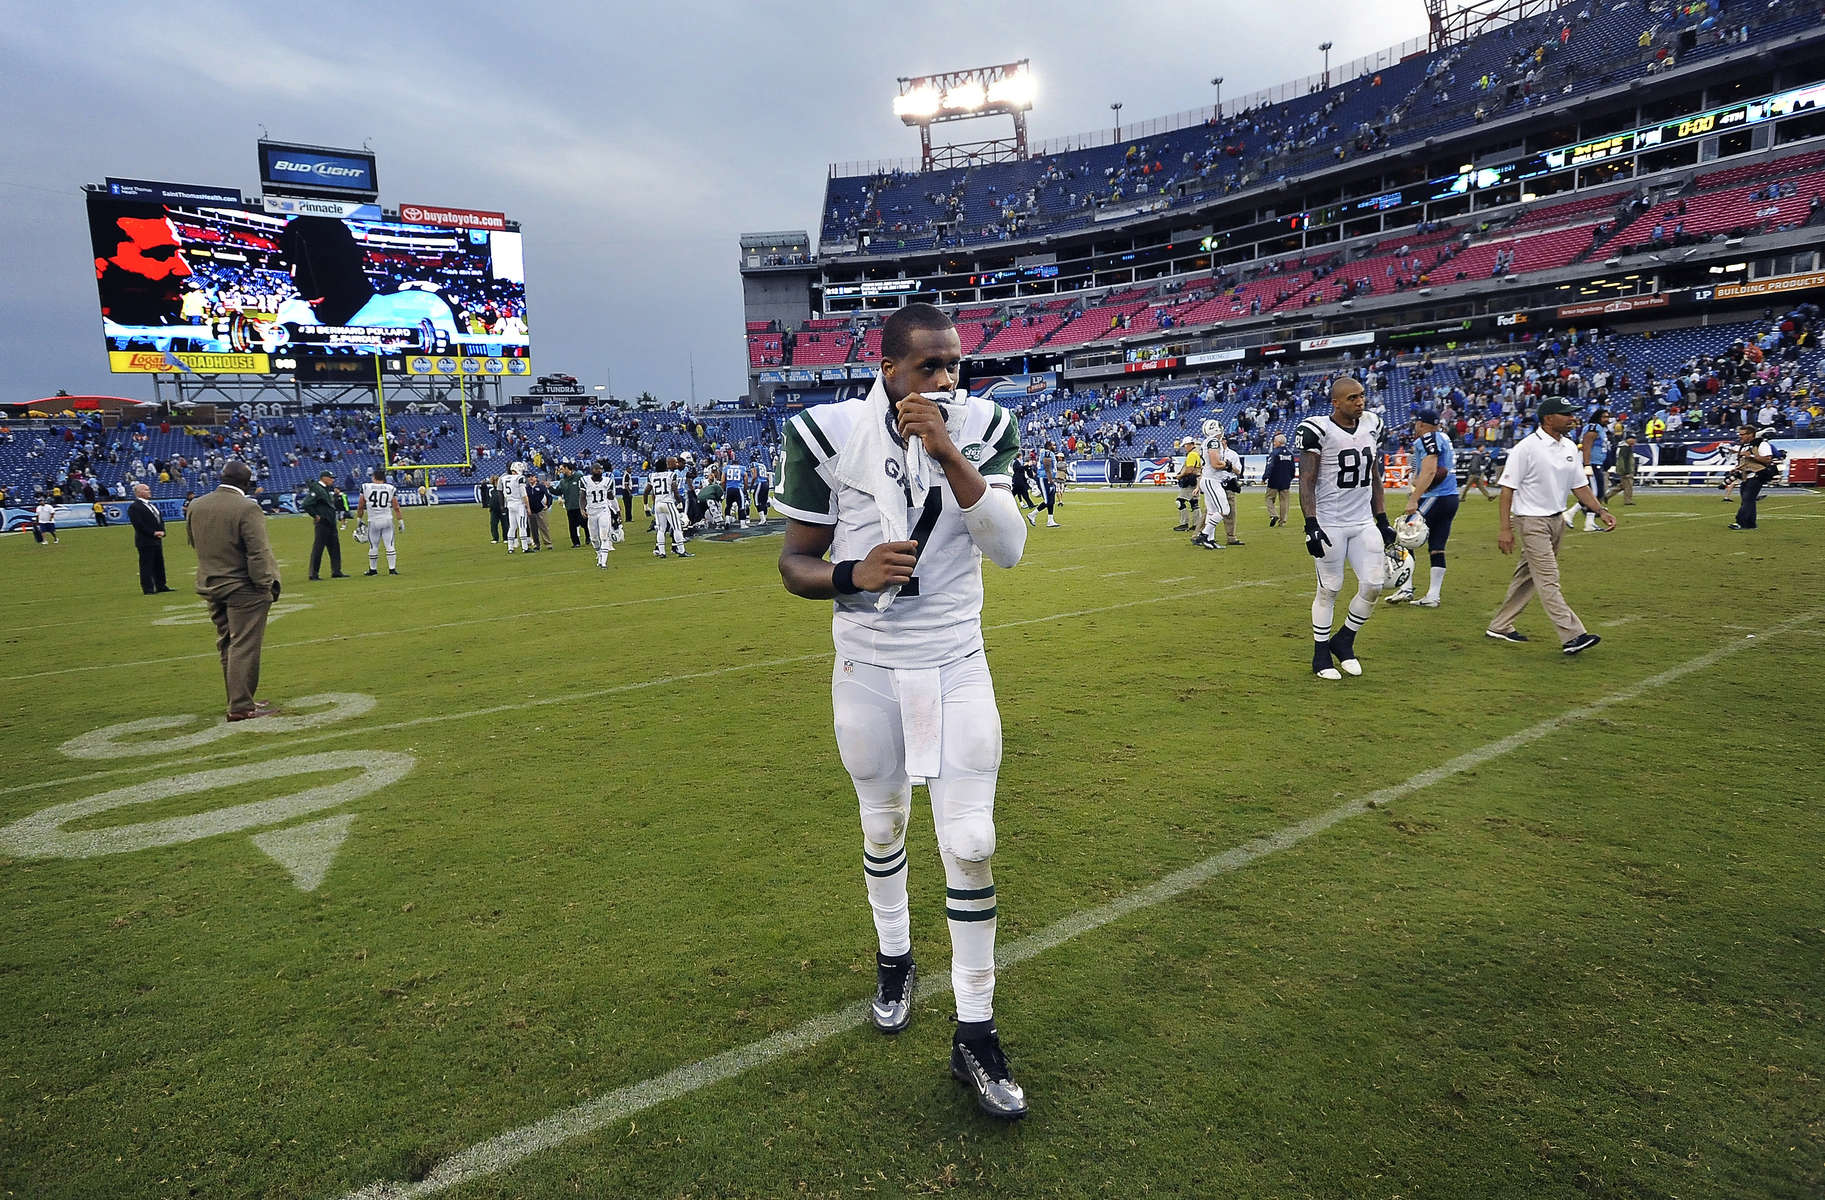 New York Jets quarterback Geno Smith leaves the field after losing to the Tennessee Titans 38-13 in an NFL football game on Sept. 29, 2013, in Nashville, Tenn. (AP Photo/ Mark Zaleski)